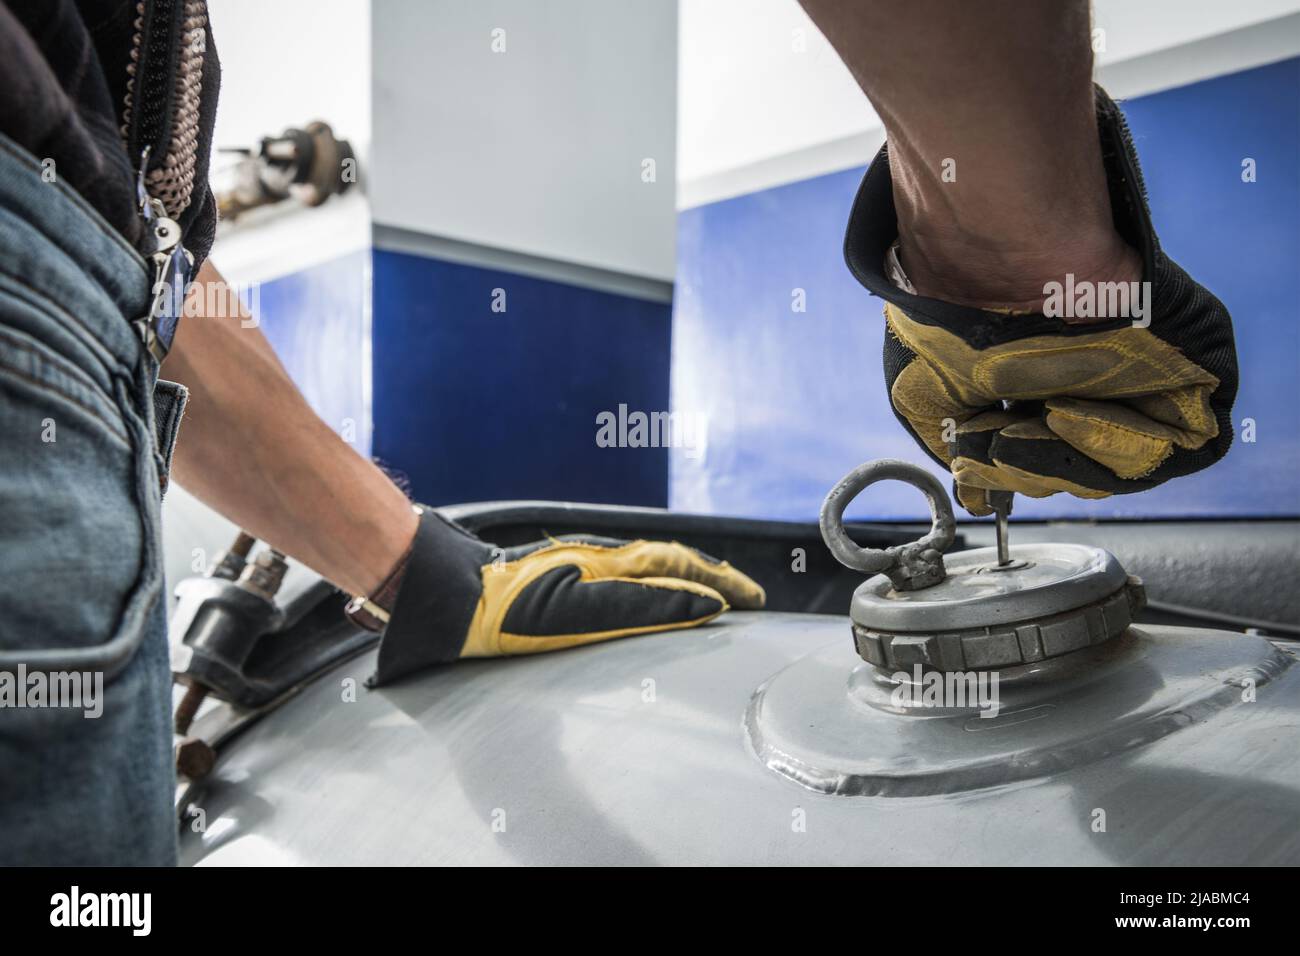 Semi Truck Driver Driving Opening Fuel Cap in His Vehicle. Diesel Fuel Tank. Transportation Theme. Stock Photo